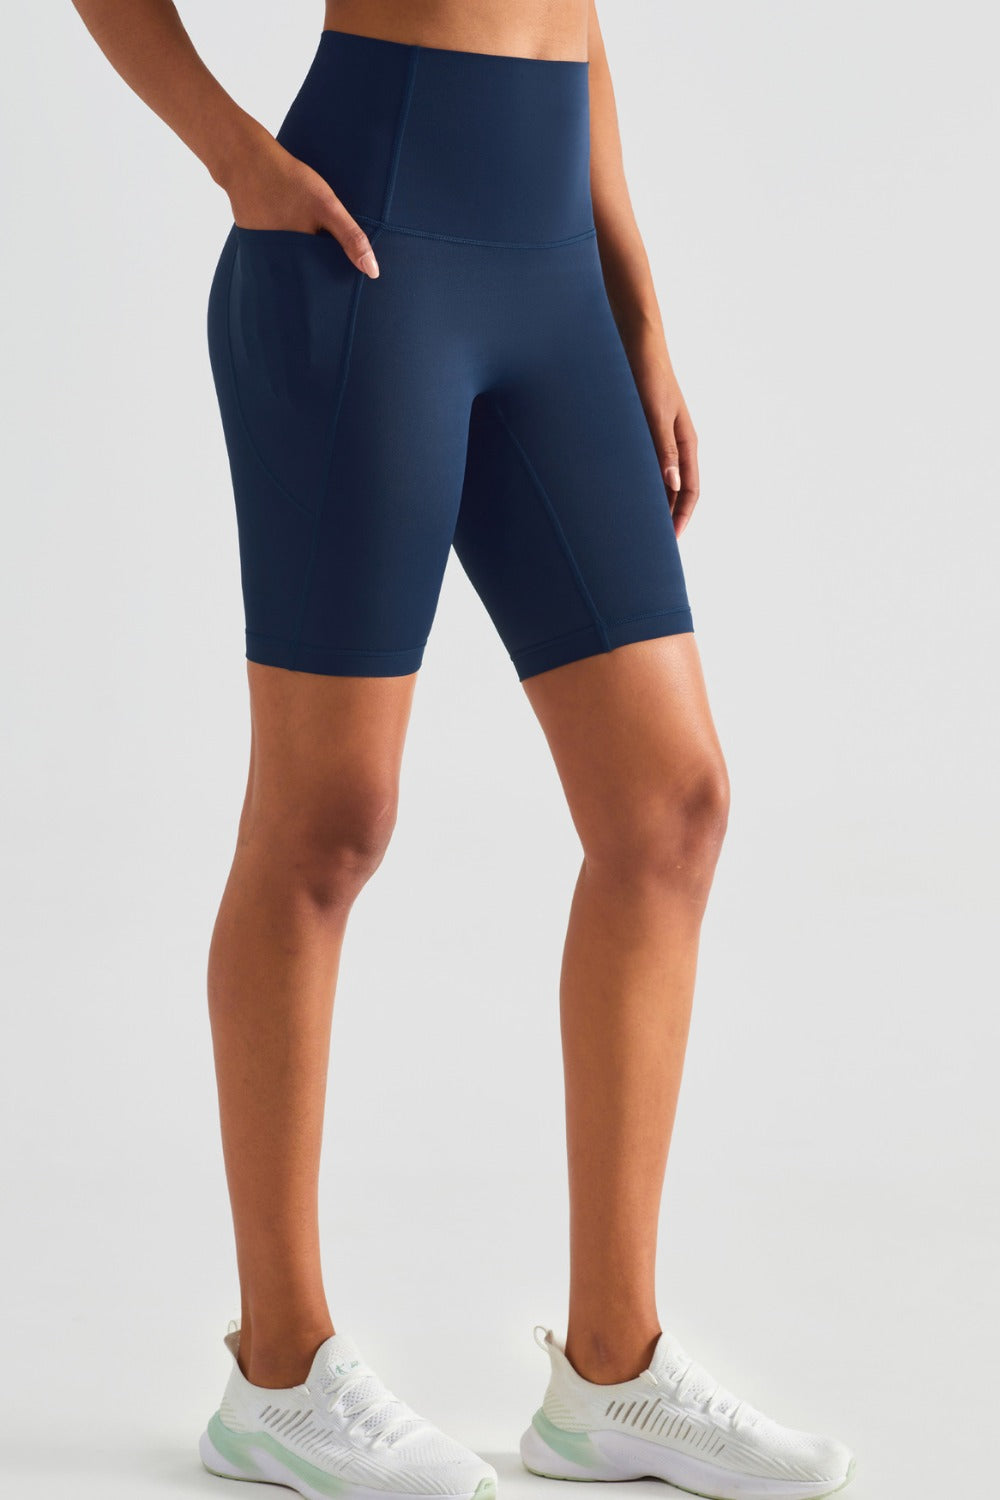 Pocketed High Waist Active Shorts Peacock Blue